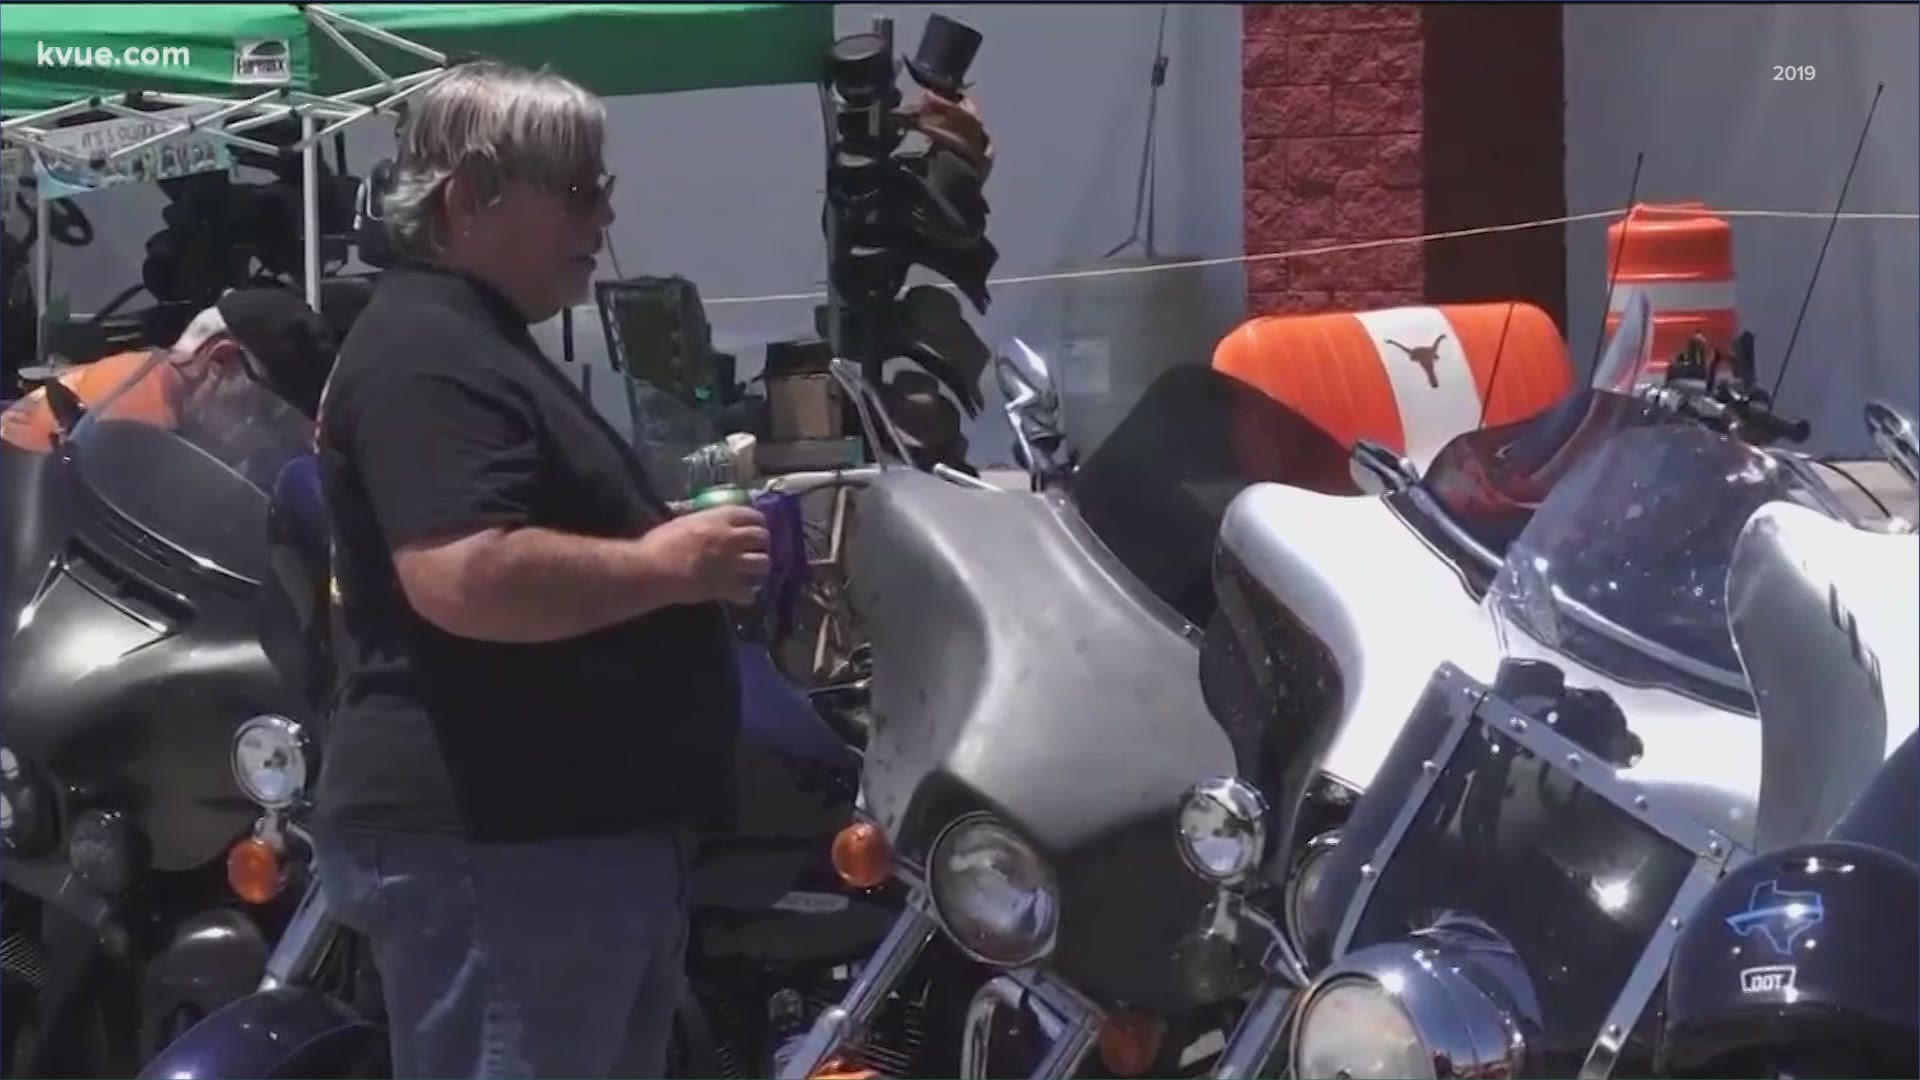 After taking a year off due to the pandemic, the Republic of Texas motorcycle rally is returning to Austin.